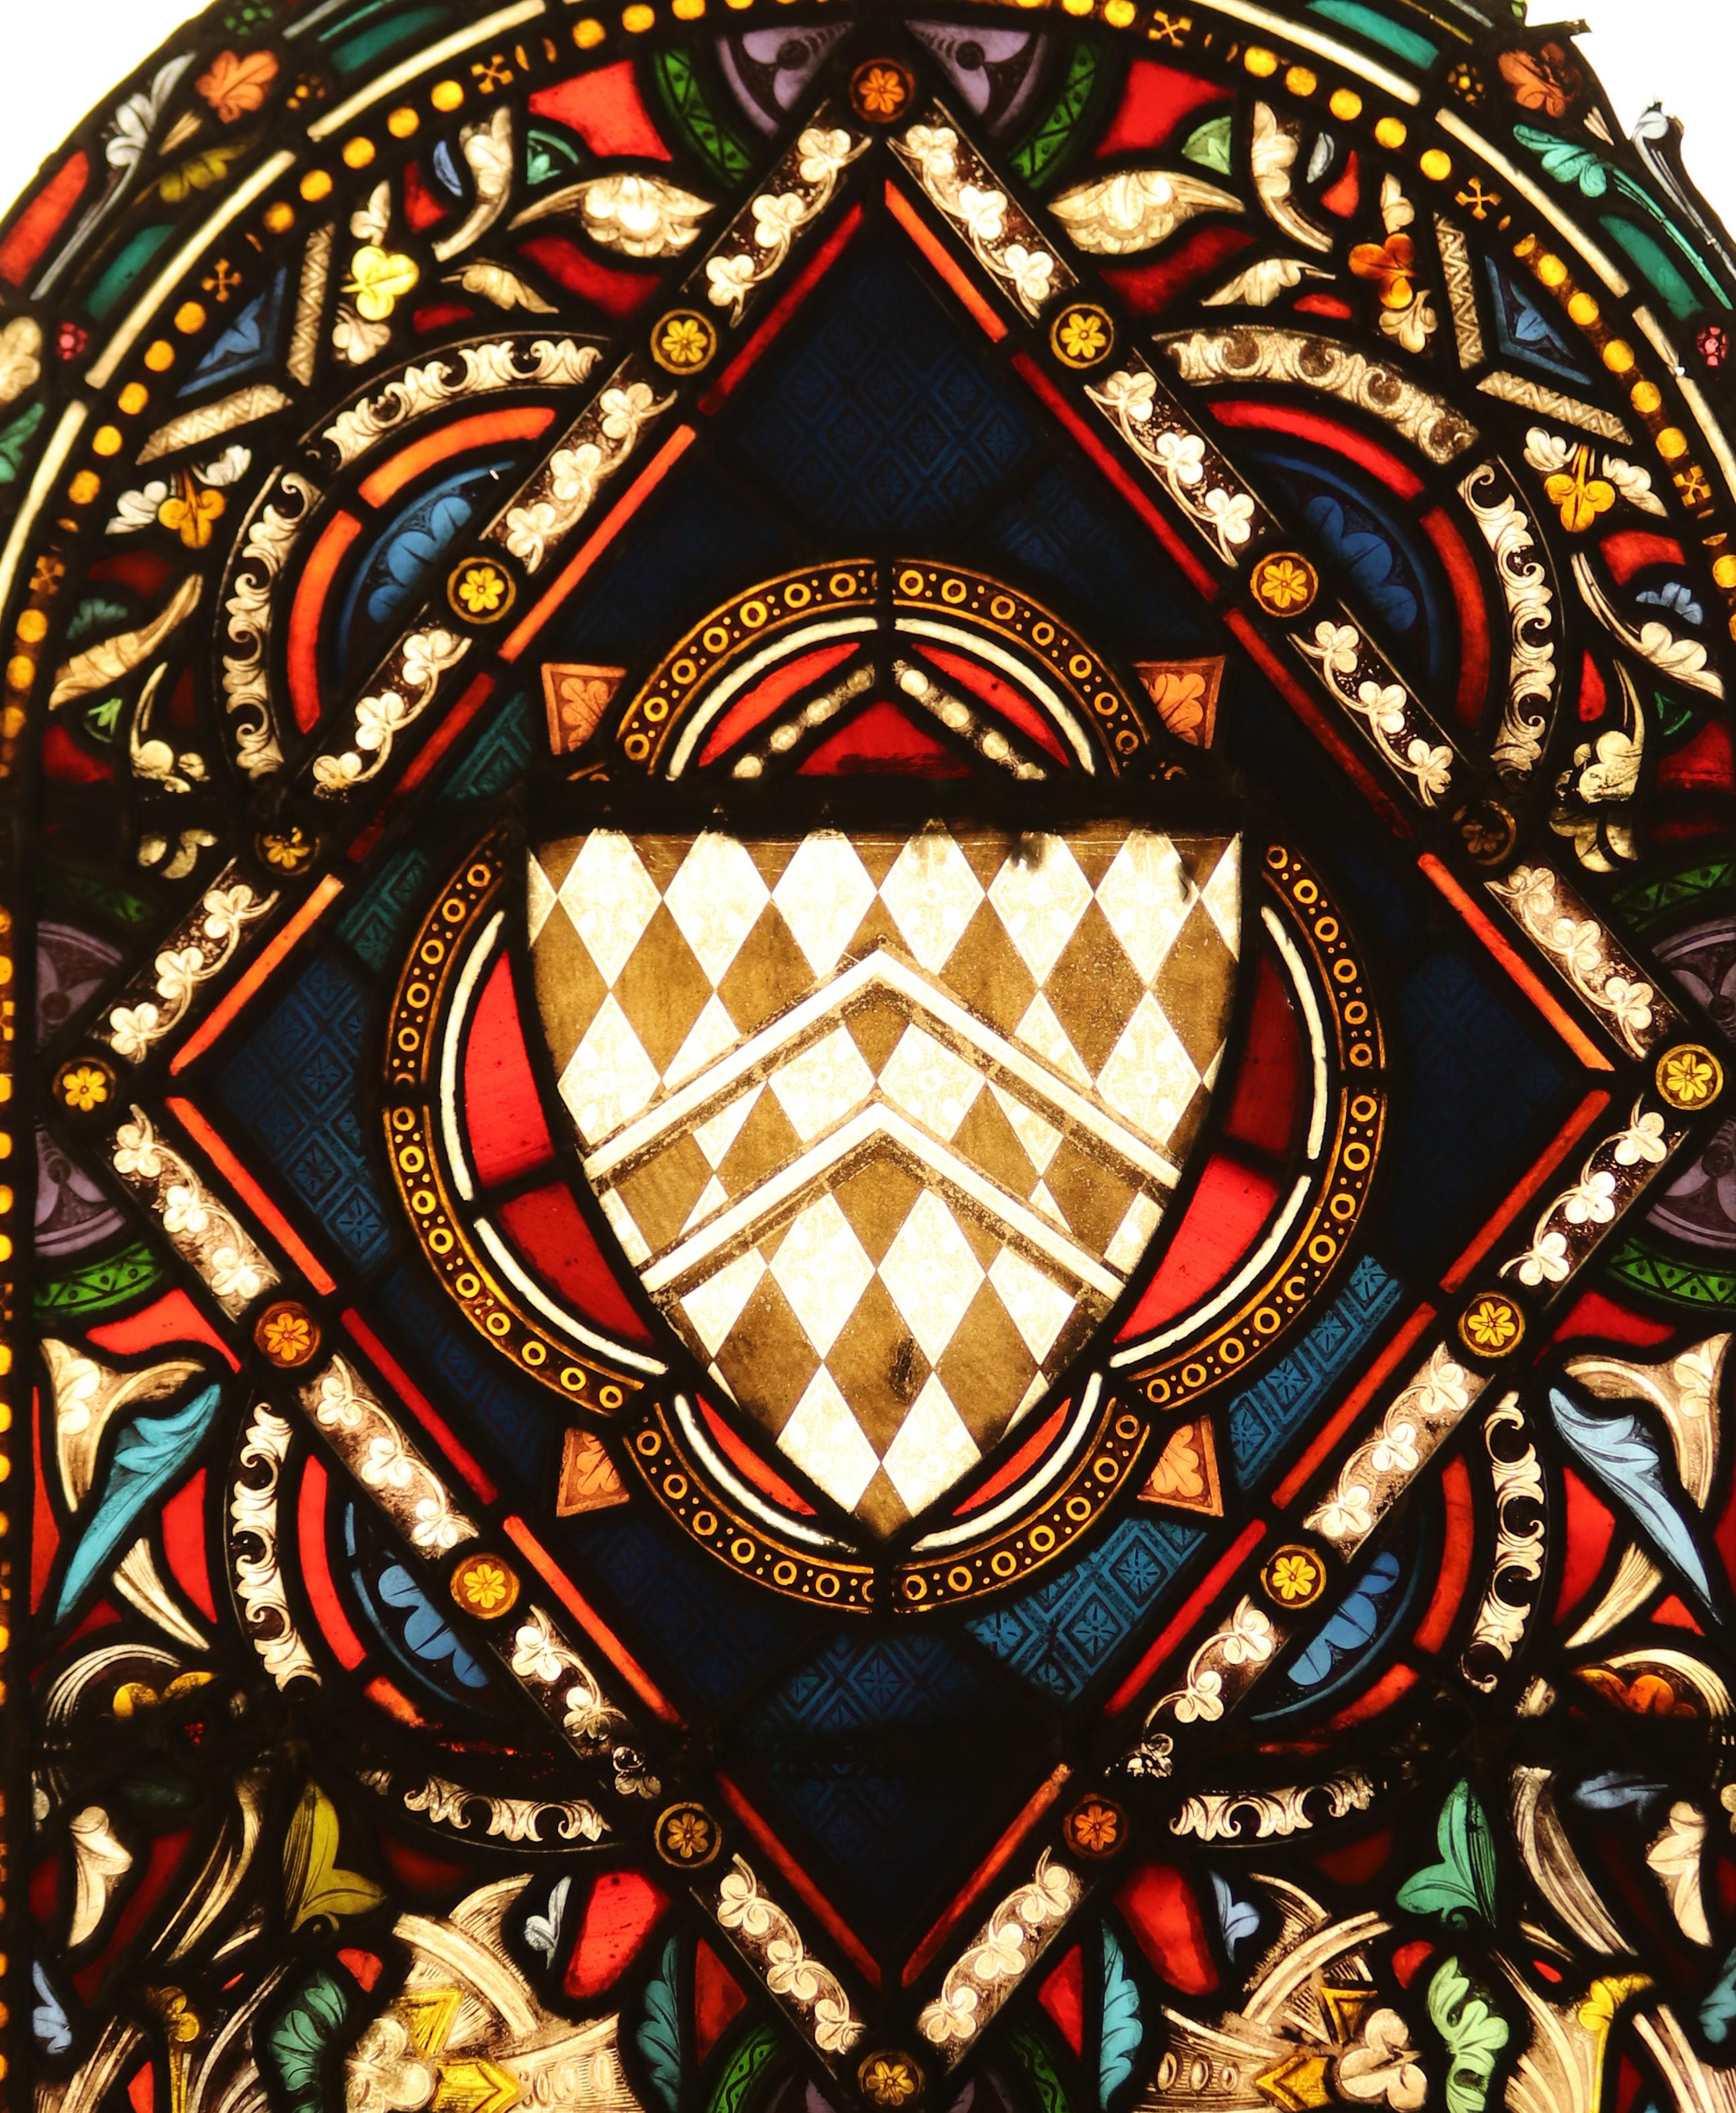 A reclaimed arched stained glass window with a central shield crest.